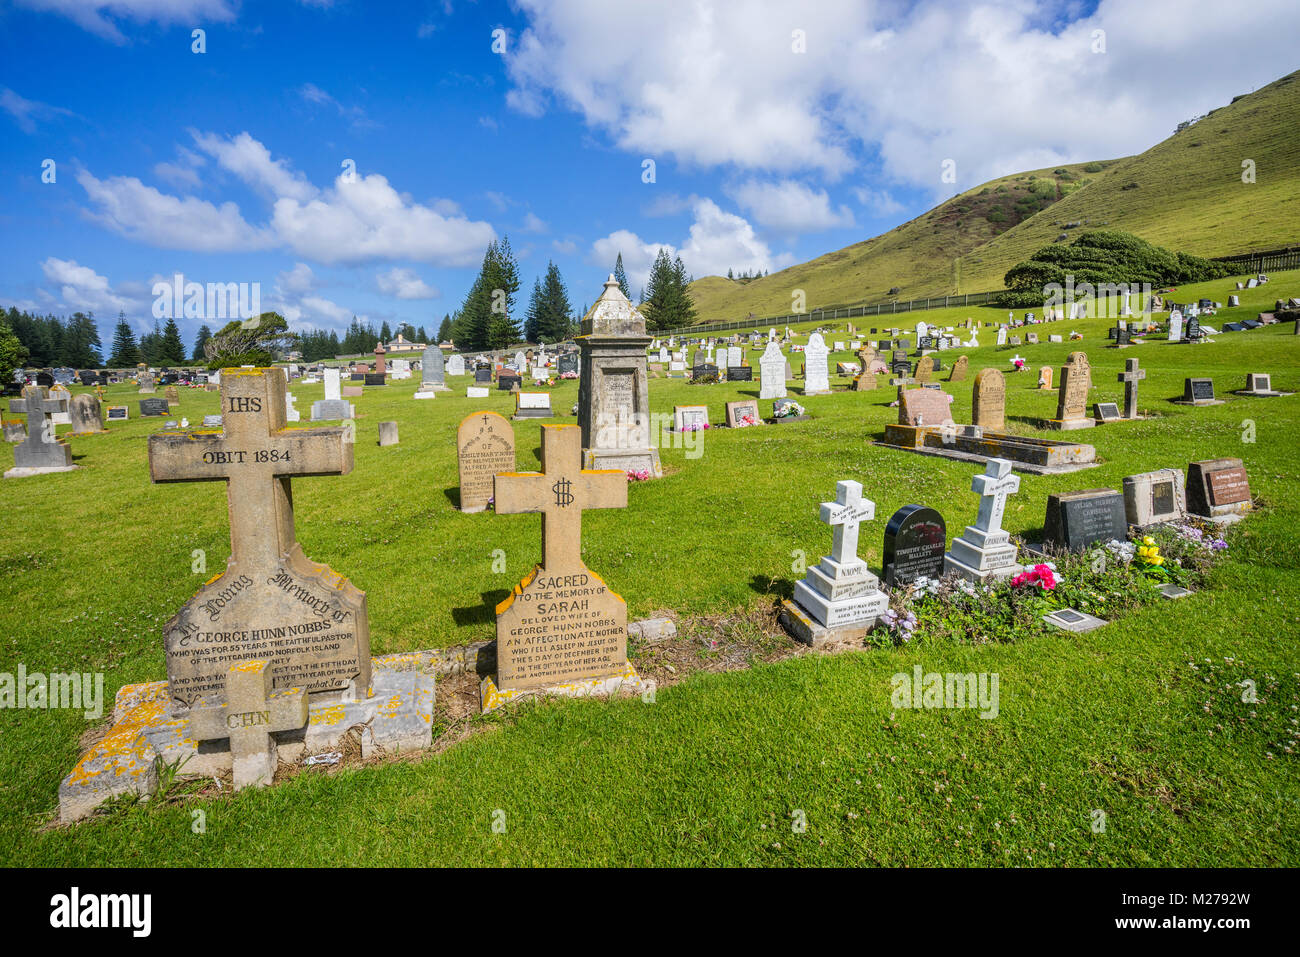 Norfolk Island, Australian external territory, Kingston, the historic Norfolk Island Cemetery contains graves of convicts, soldiers and Pitcairn Islan Stock Photo